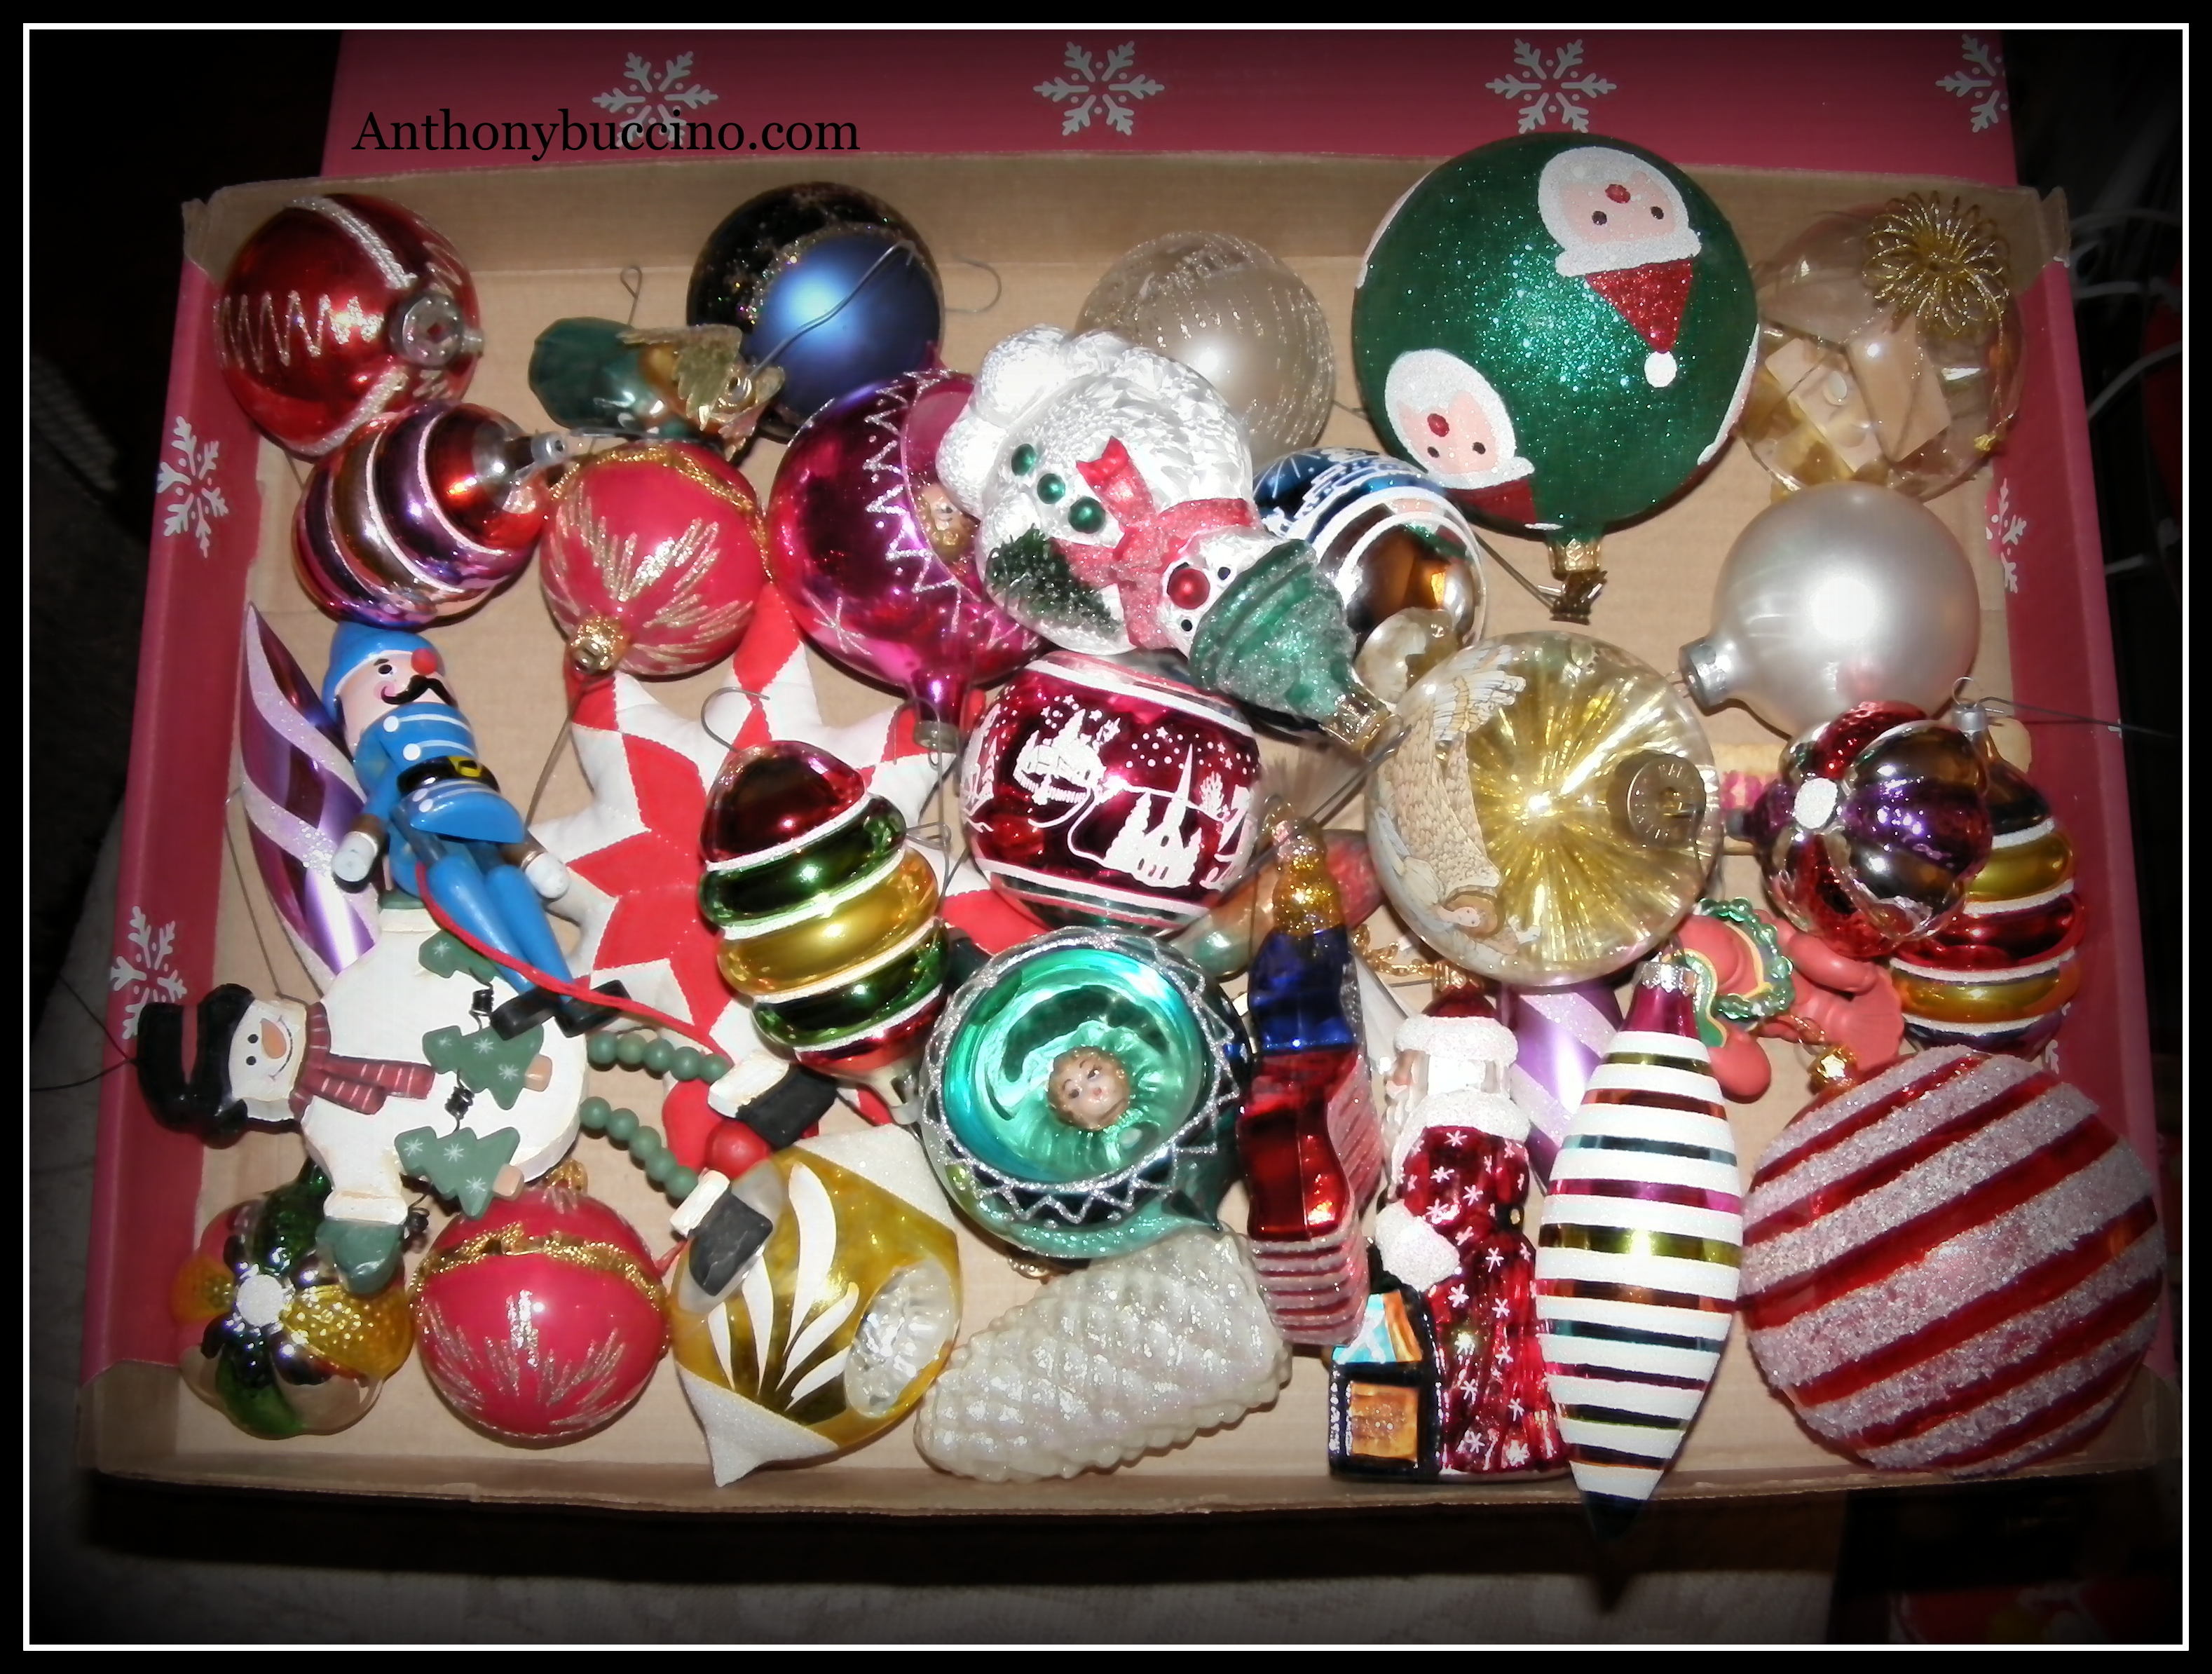 Christmas Tree Ornaments, to hang or not to hang - by Anthony Buccino Copyright  2009 